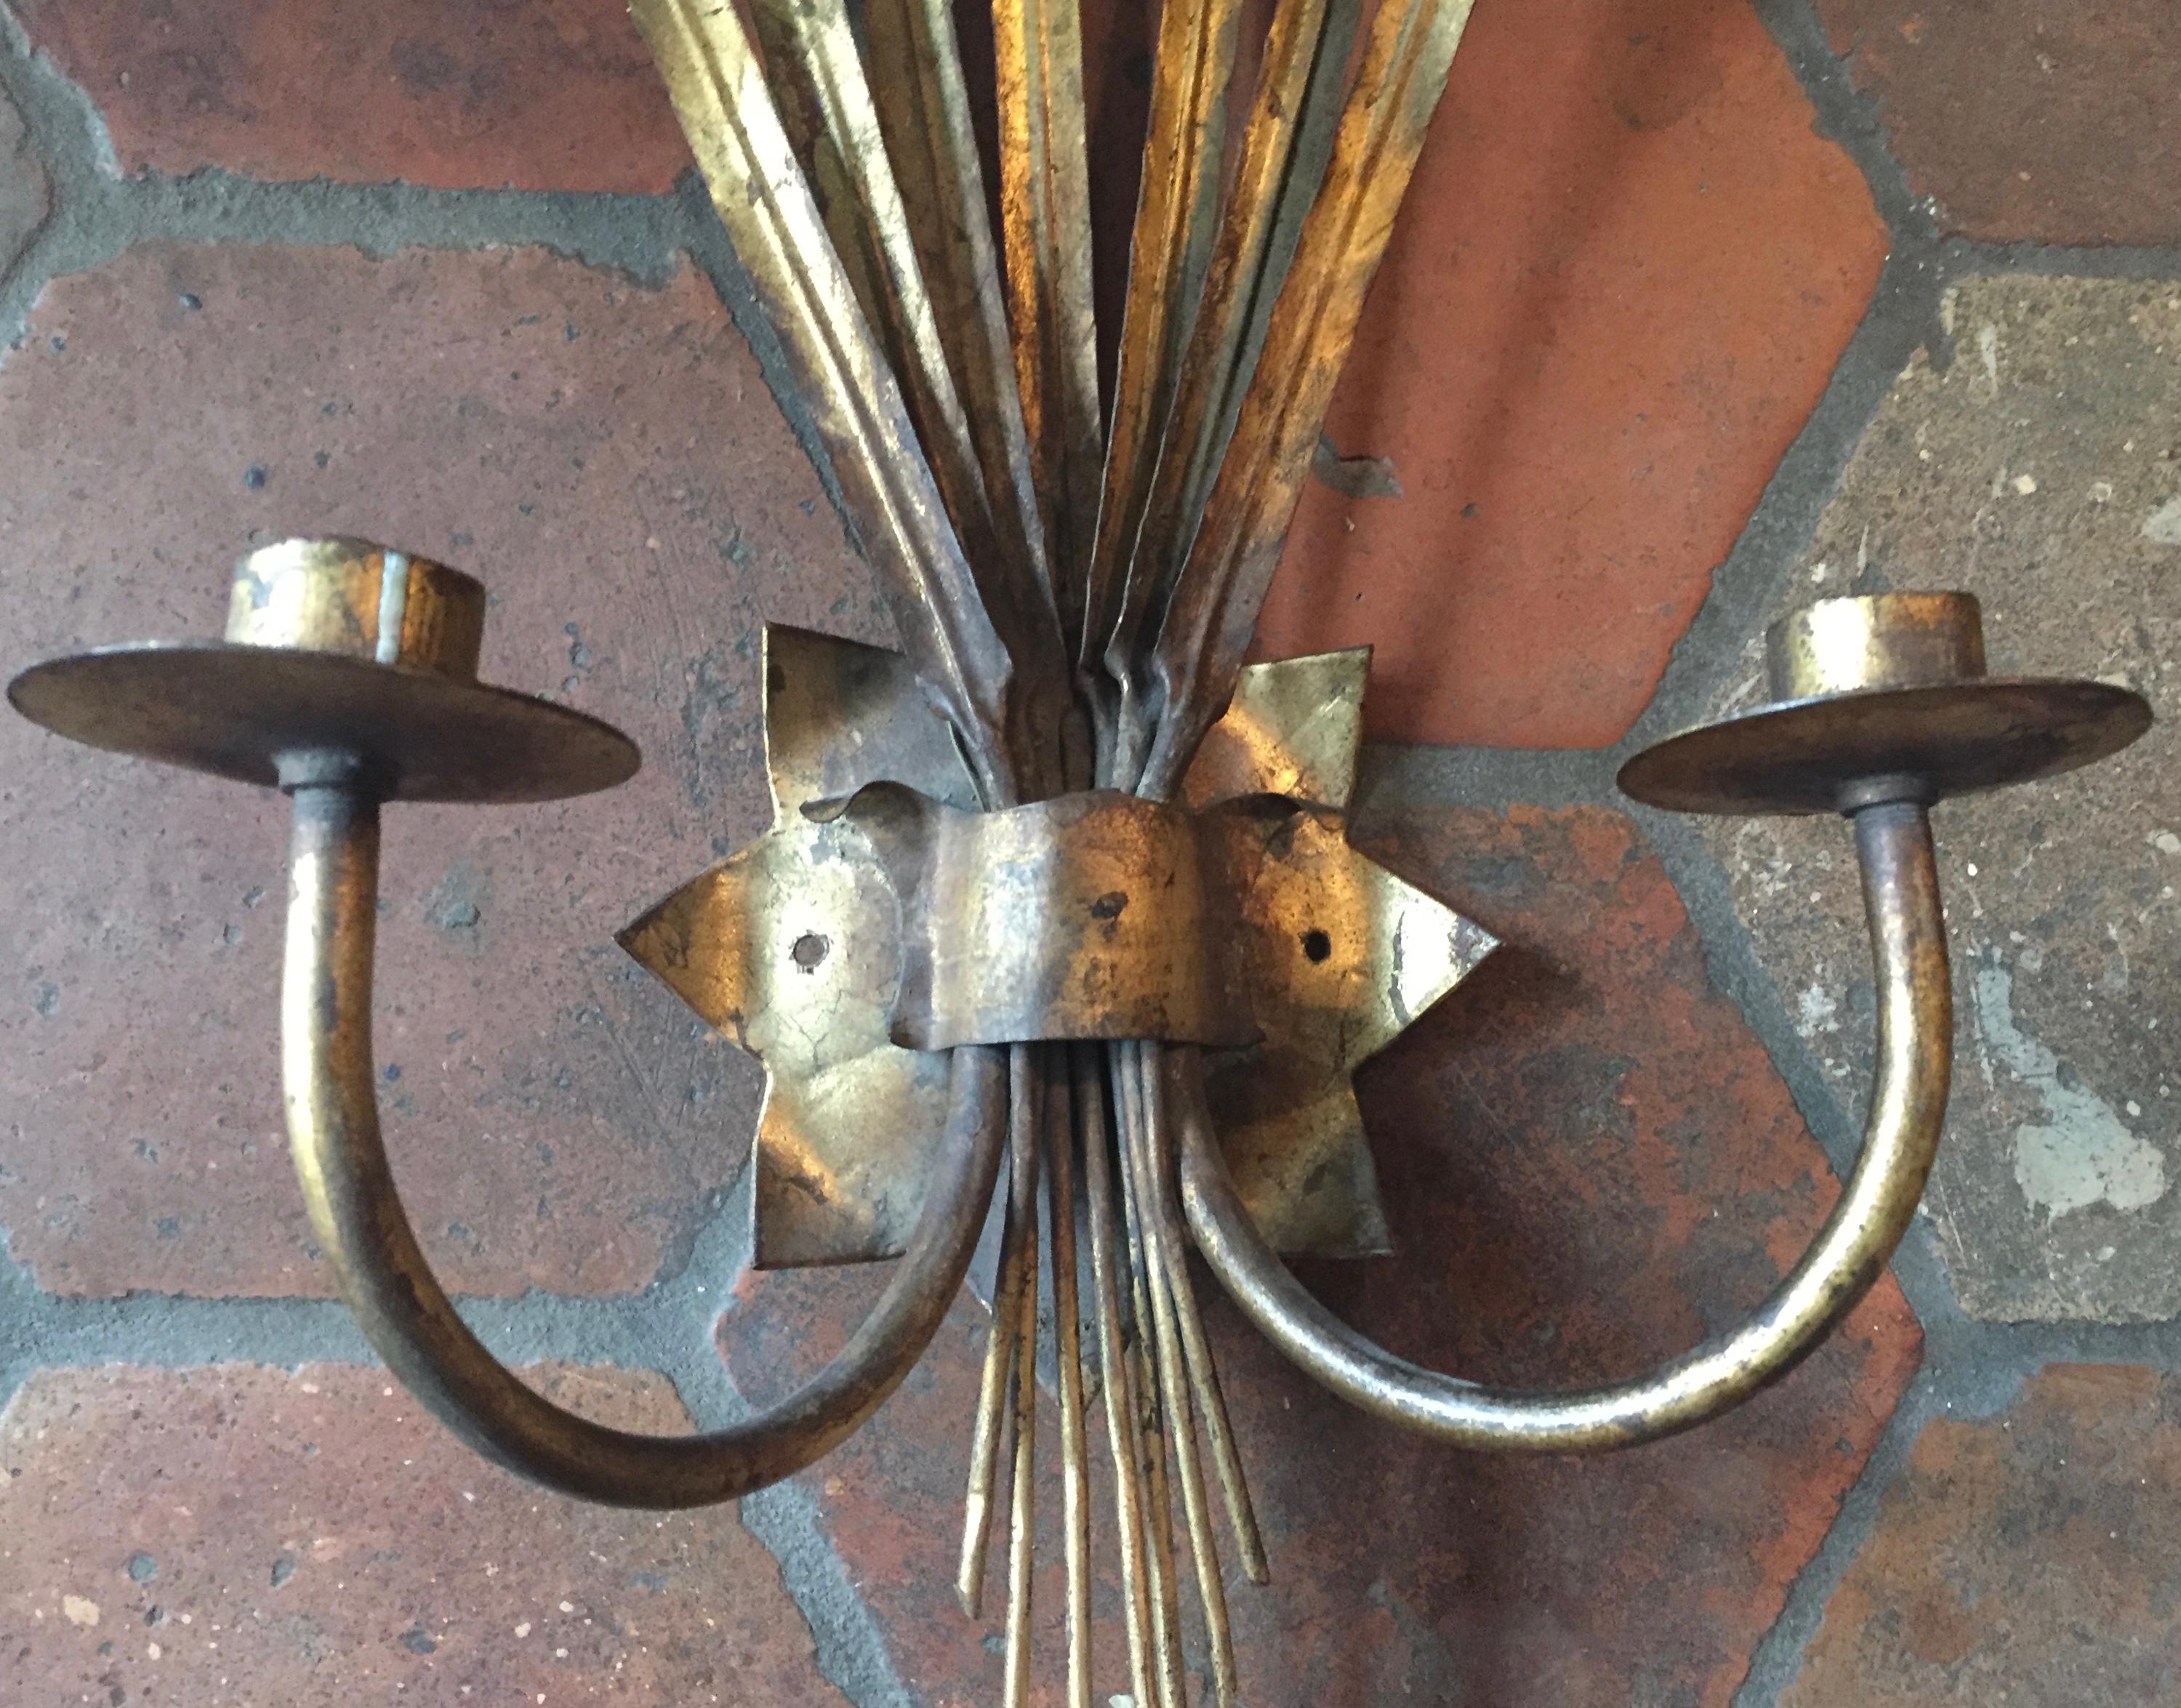 Pair of Spanish sconces, circa 1940. Handmade from tole and wrought iron and finished in hand applied gold leaf. Originally made for electricity but the wires have been removed to be used with candles. We can provide a quote to rewire them with new